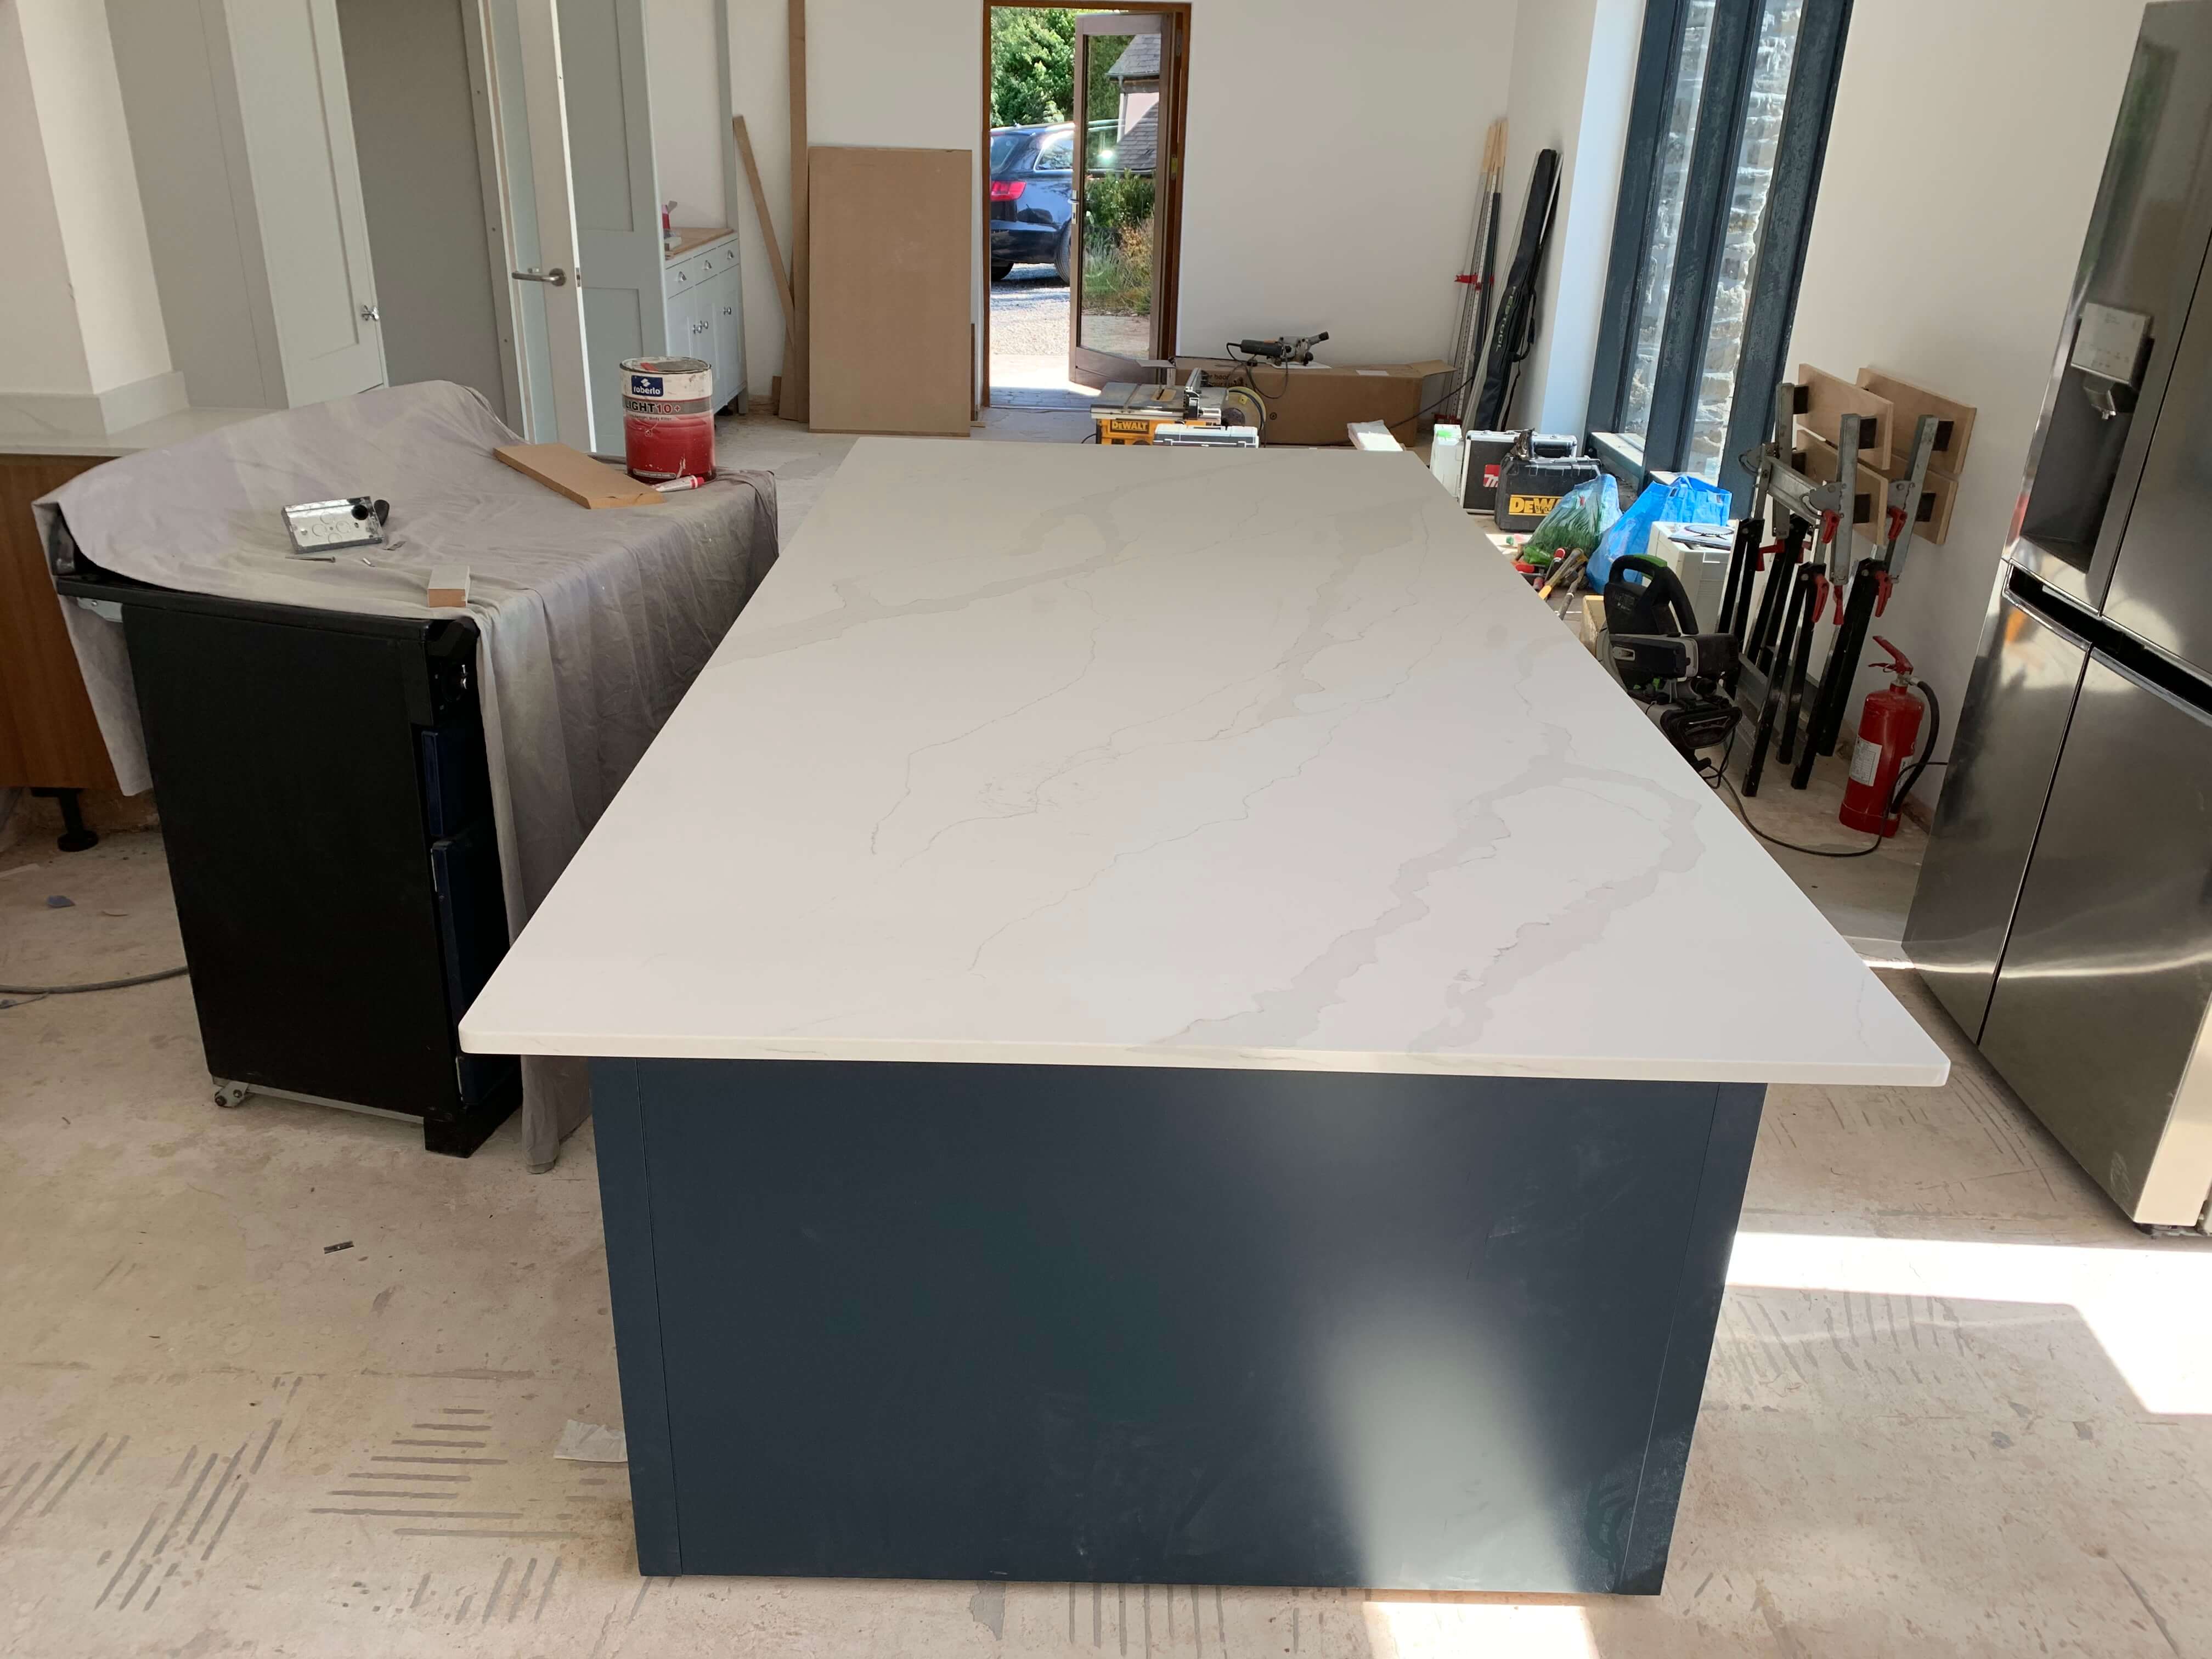 Quartz worktop fitted on the Island